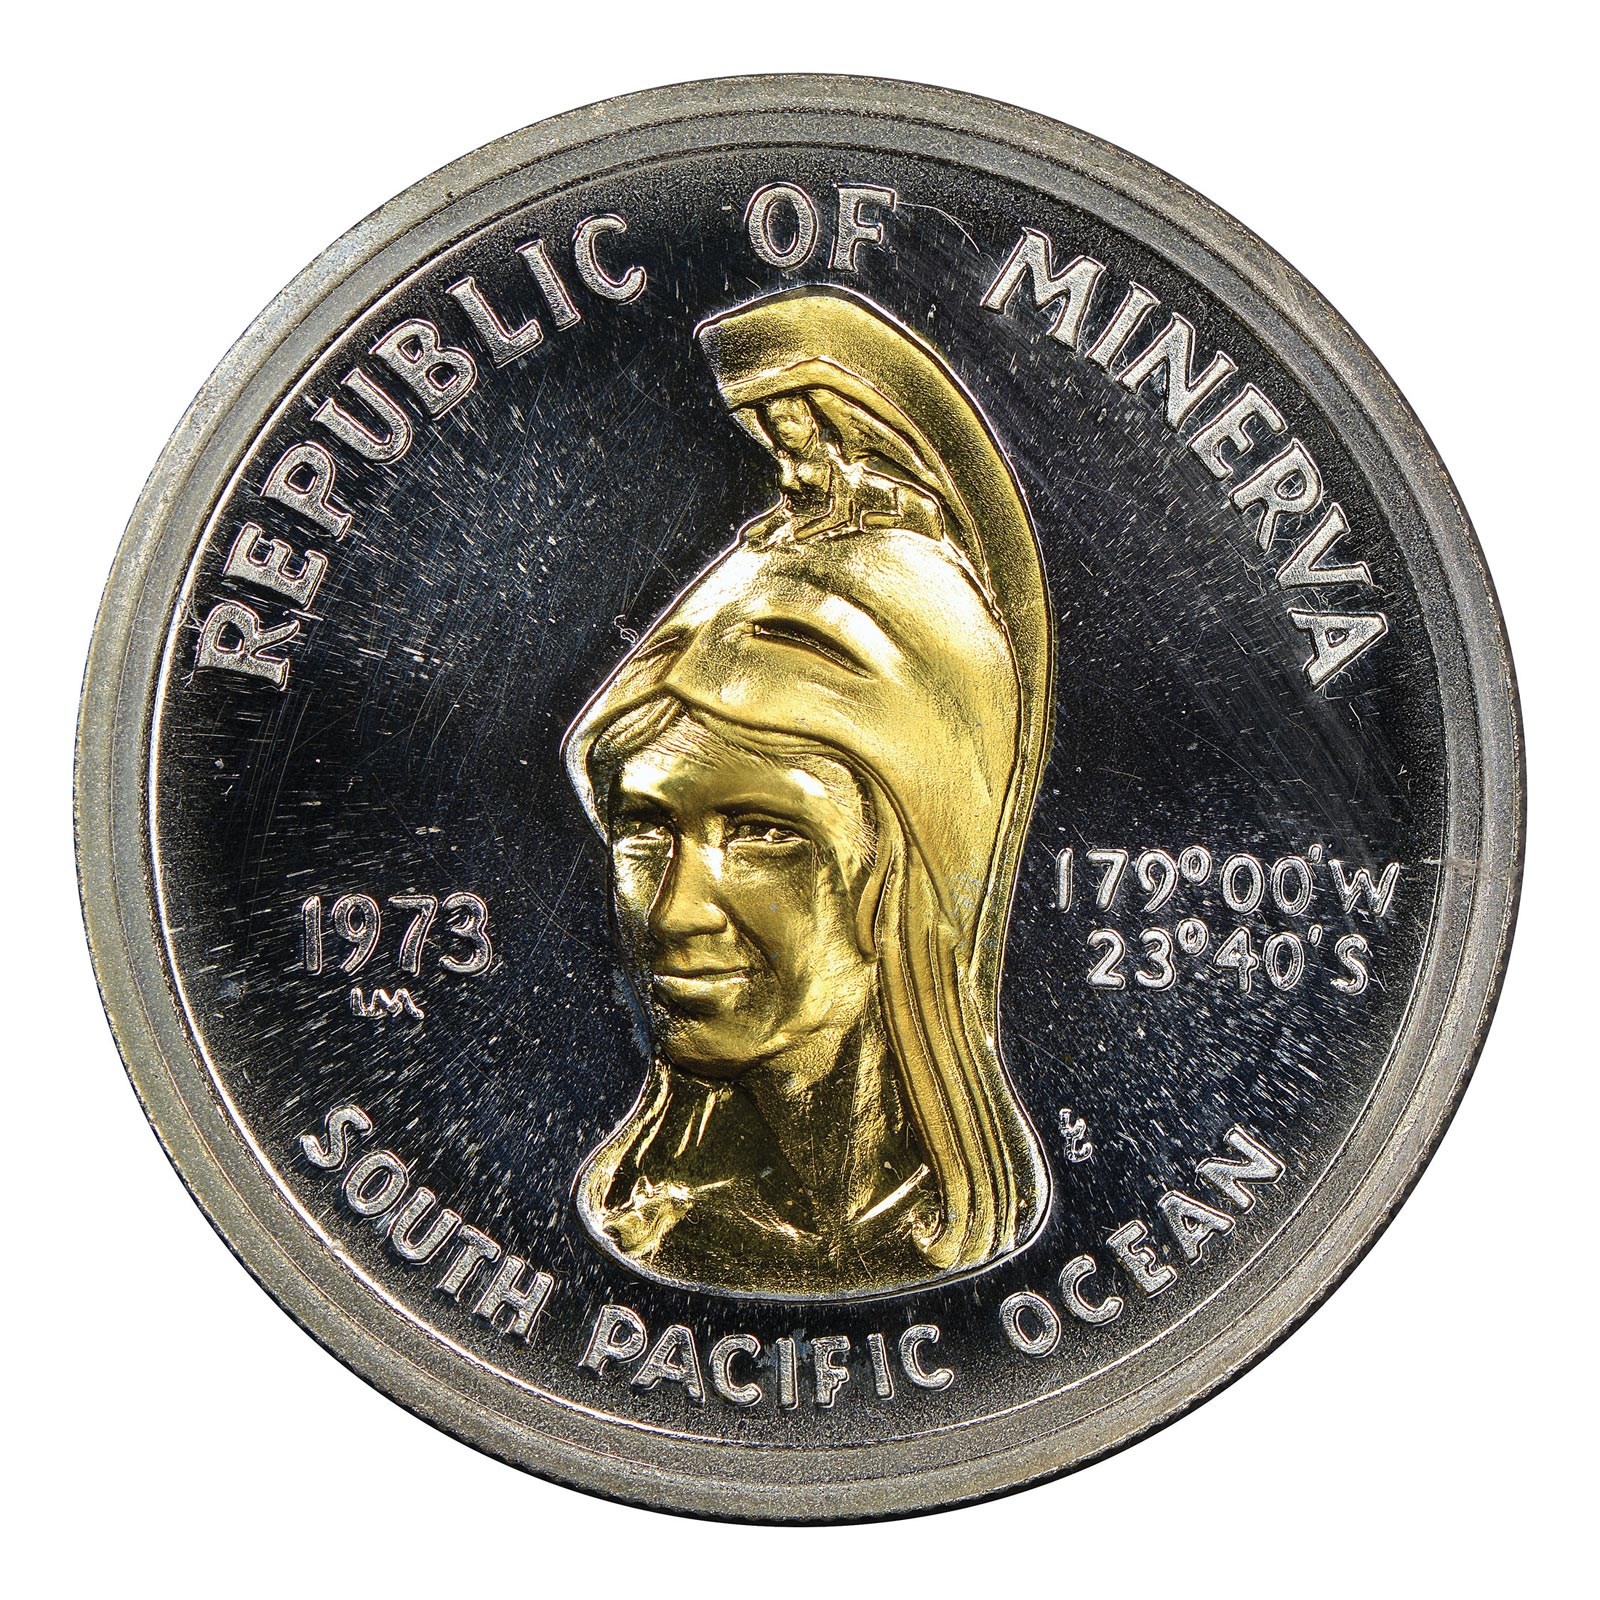 The front of a gold-and-silver coin issued in 1973 by the Republic of Minerva, a former micronation located in the South Pacific Ocean. The two atolls on which the short-lived experimental libertarian republic was based are currently submerged below the ocean’s surface.